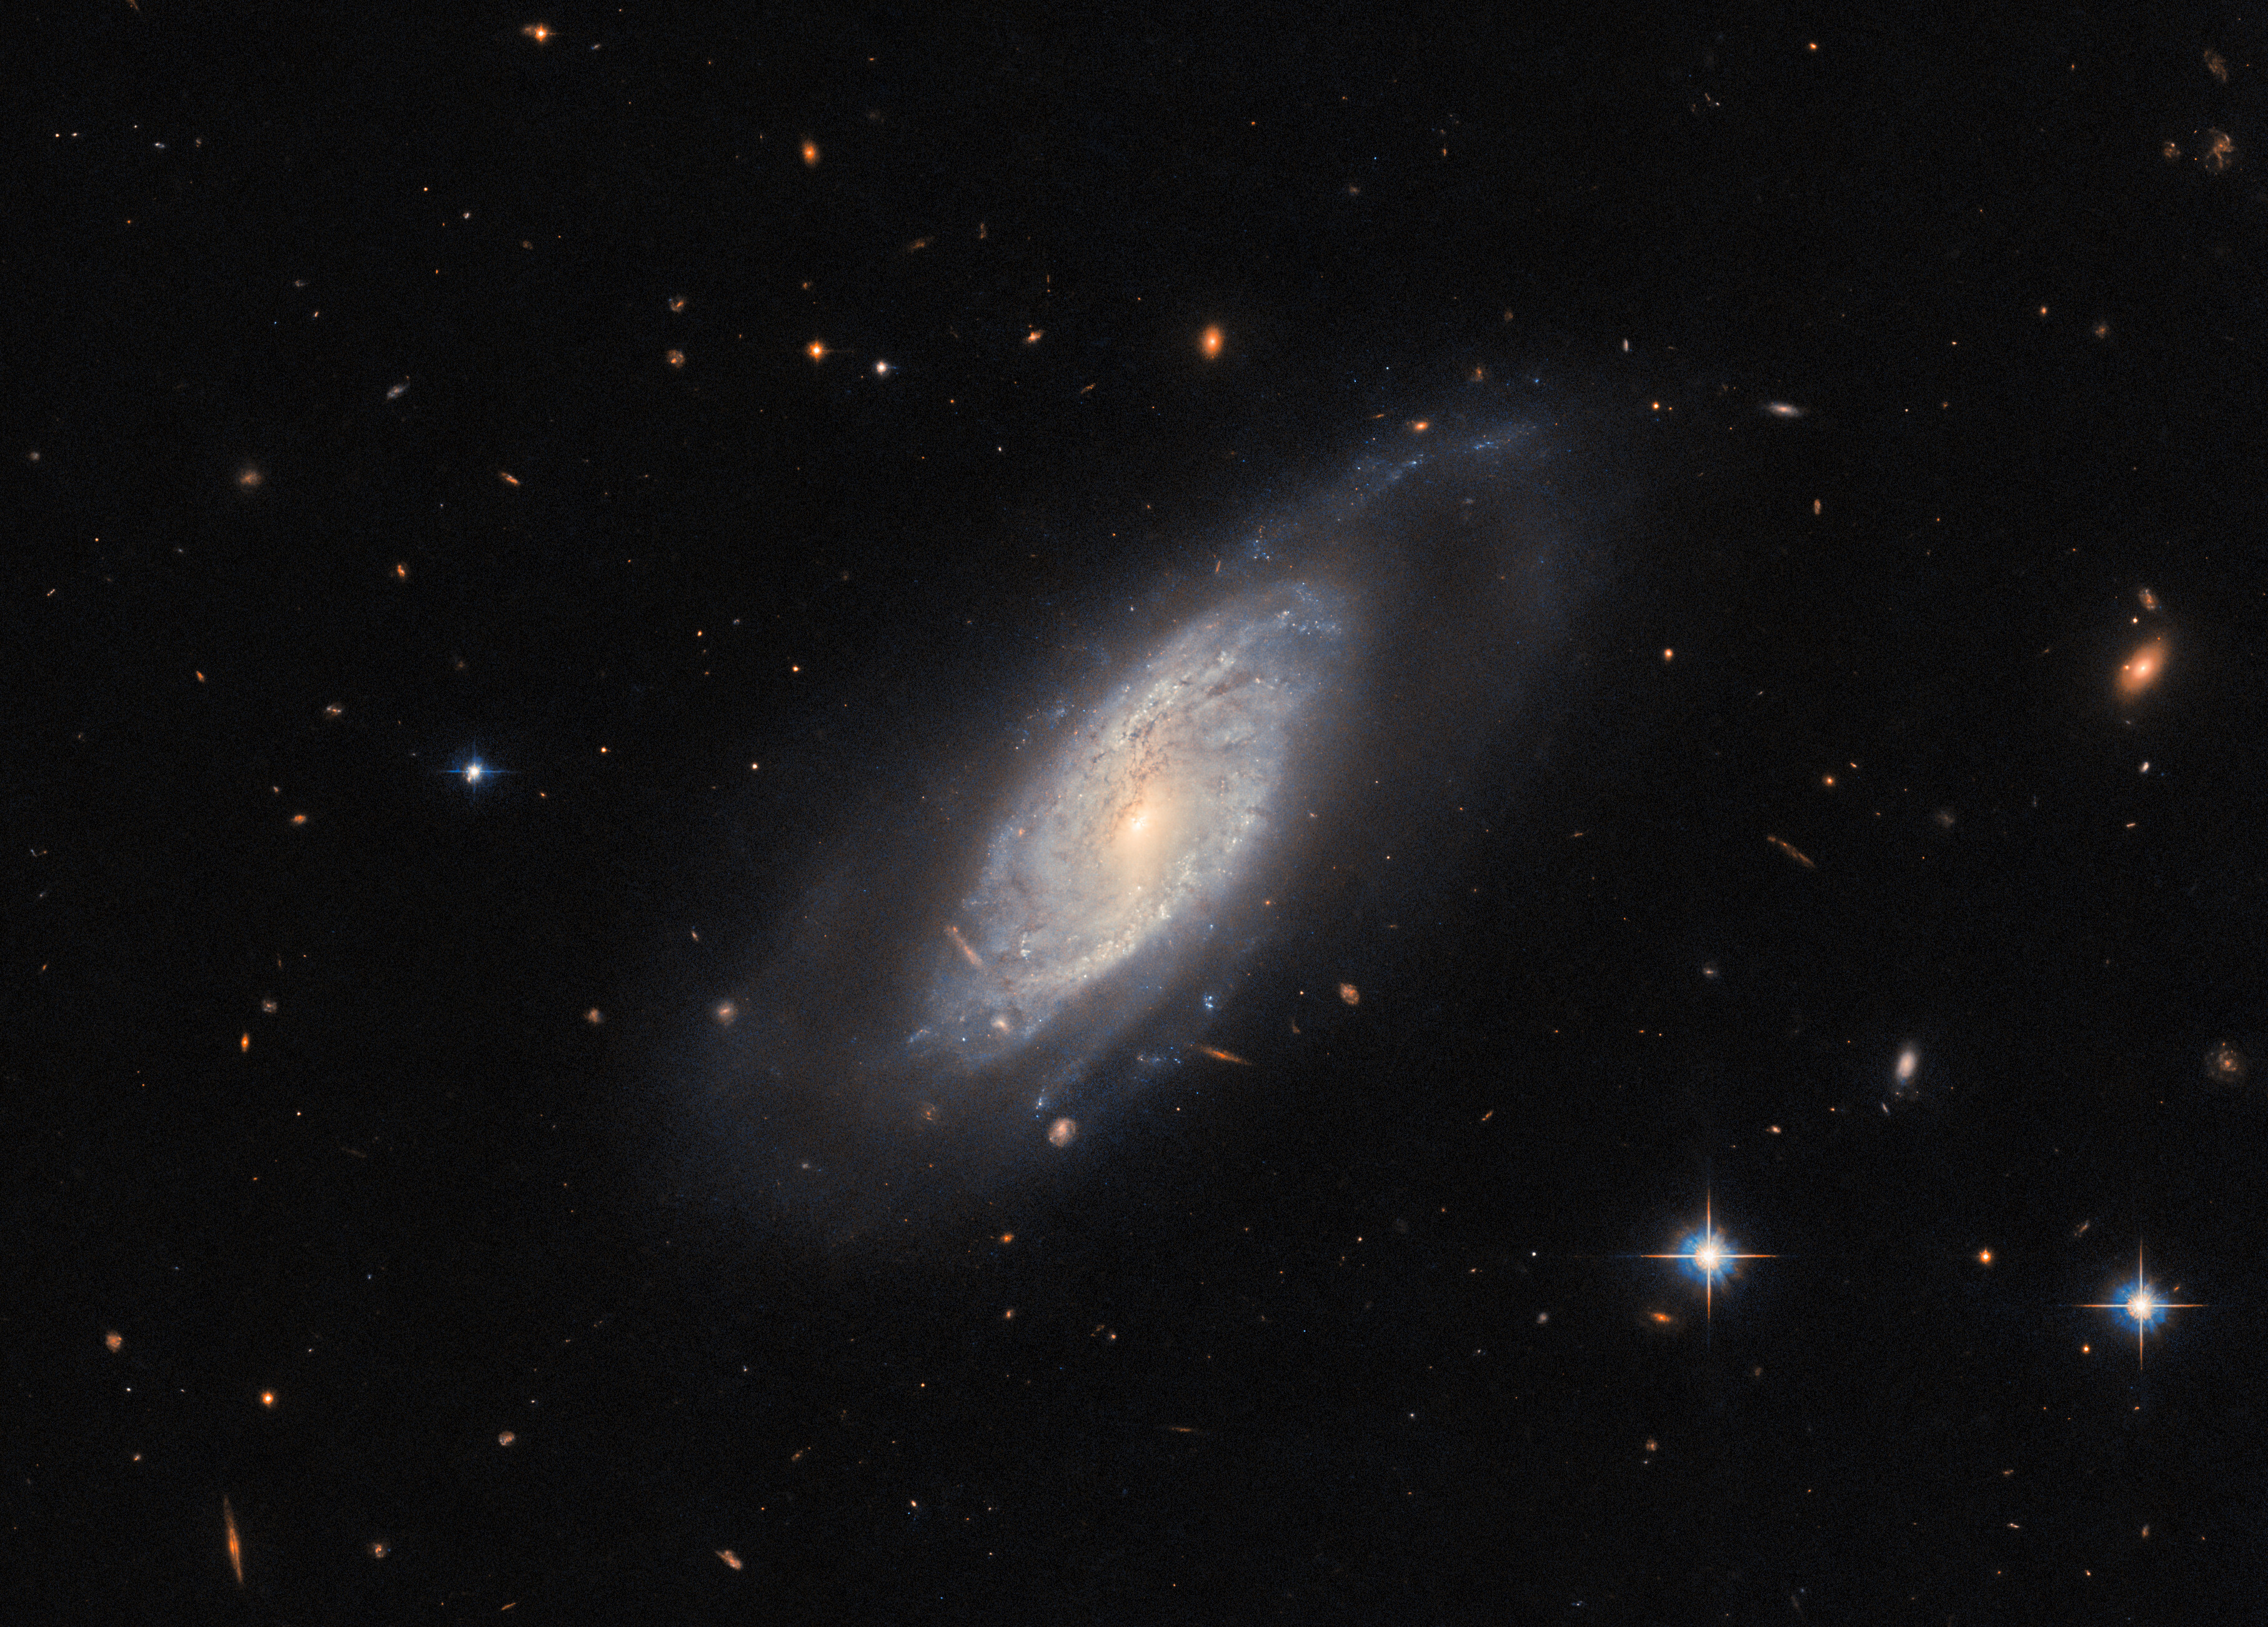 A spiral galaxy in the center of a dark background, surrounded by a few distant galaxies and nearby stars. The galaxy stretches diagonally across the center of the frame — from lower left to upper right — and is slightly tilted toward the viewer. Its cloudy disk is threaded with dust and holds no clear arms. A bar of light extends across the disk from the glowing core. A faint halo of gas surrounds the disk.